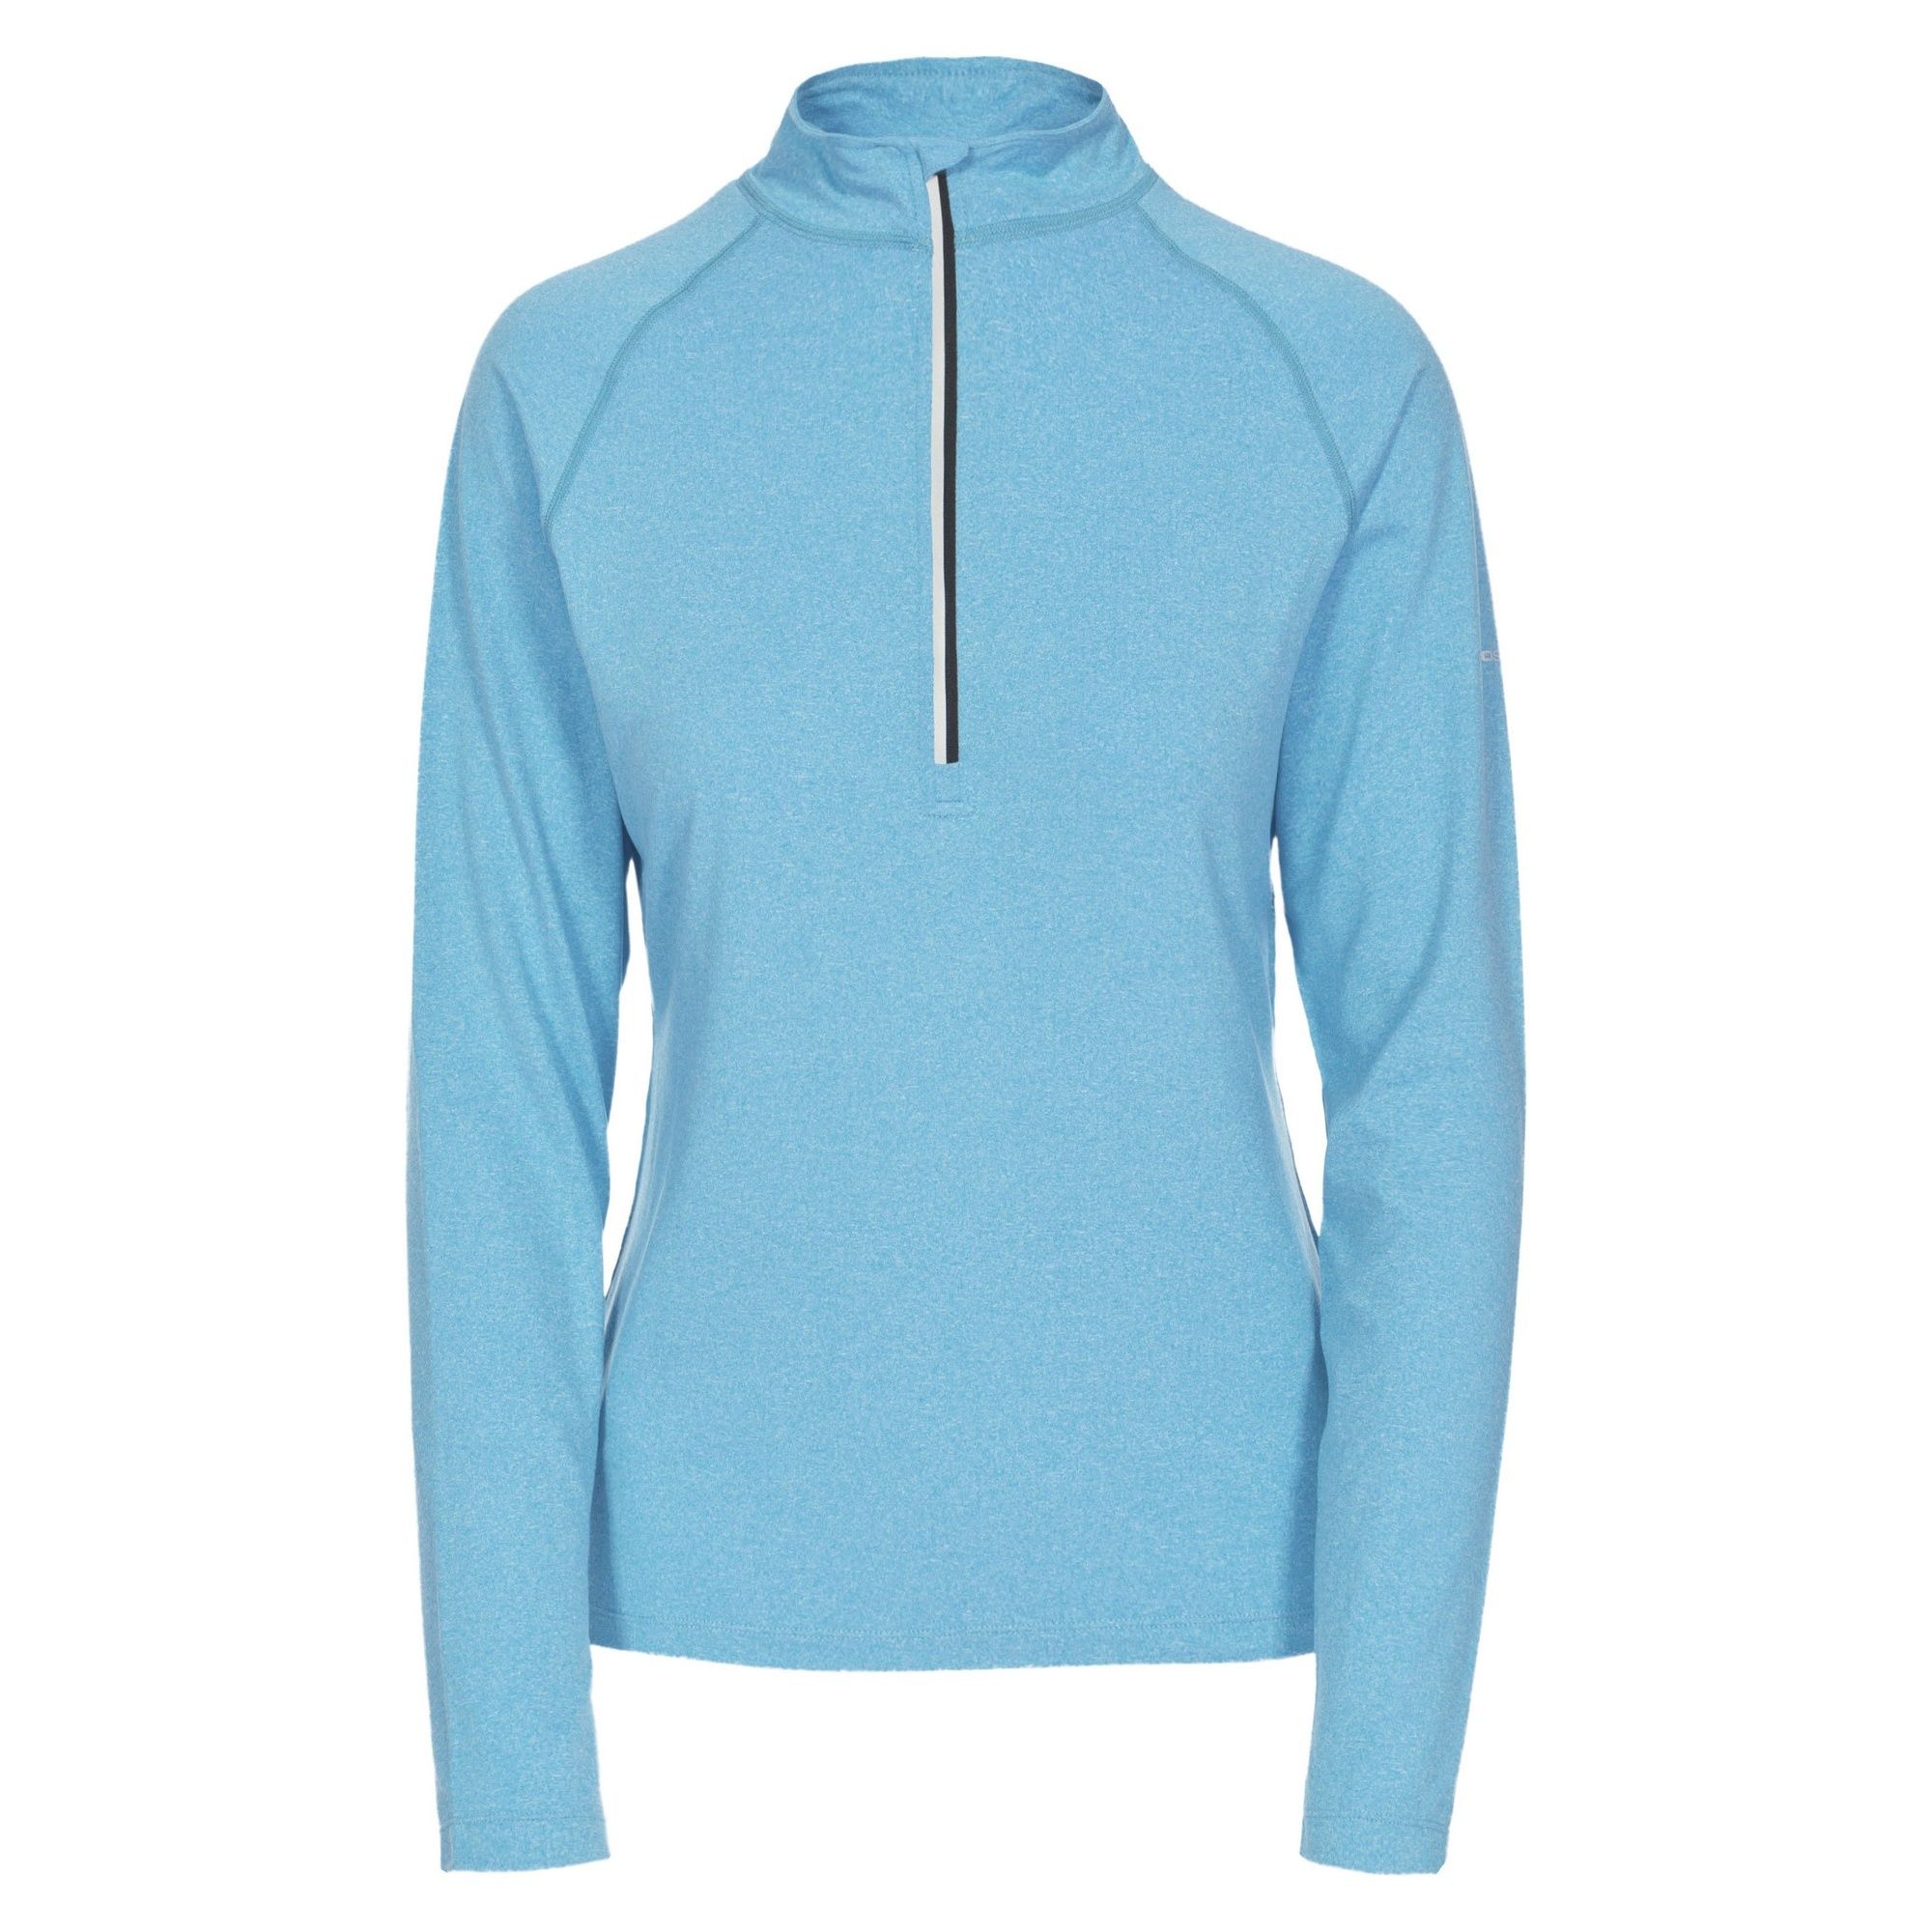 1/2 zip neck. Long sleeve. Reflective printed logos. Reflective piping along CF zip. Wicking. Quick dry. 88% Polyester, 12% Elastane. Trespass Womens Chest Sizing (approx): XS/8 - 32in/81cm, S/10 - 34in/86cm, M/12 - 36in/91.4cm, L/14 - 38in/96.5cm, XL/16 - 40in/101.5cm, XXL/18 - 42in/106.5cm.